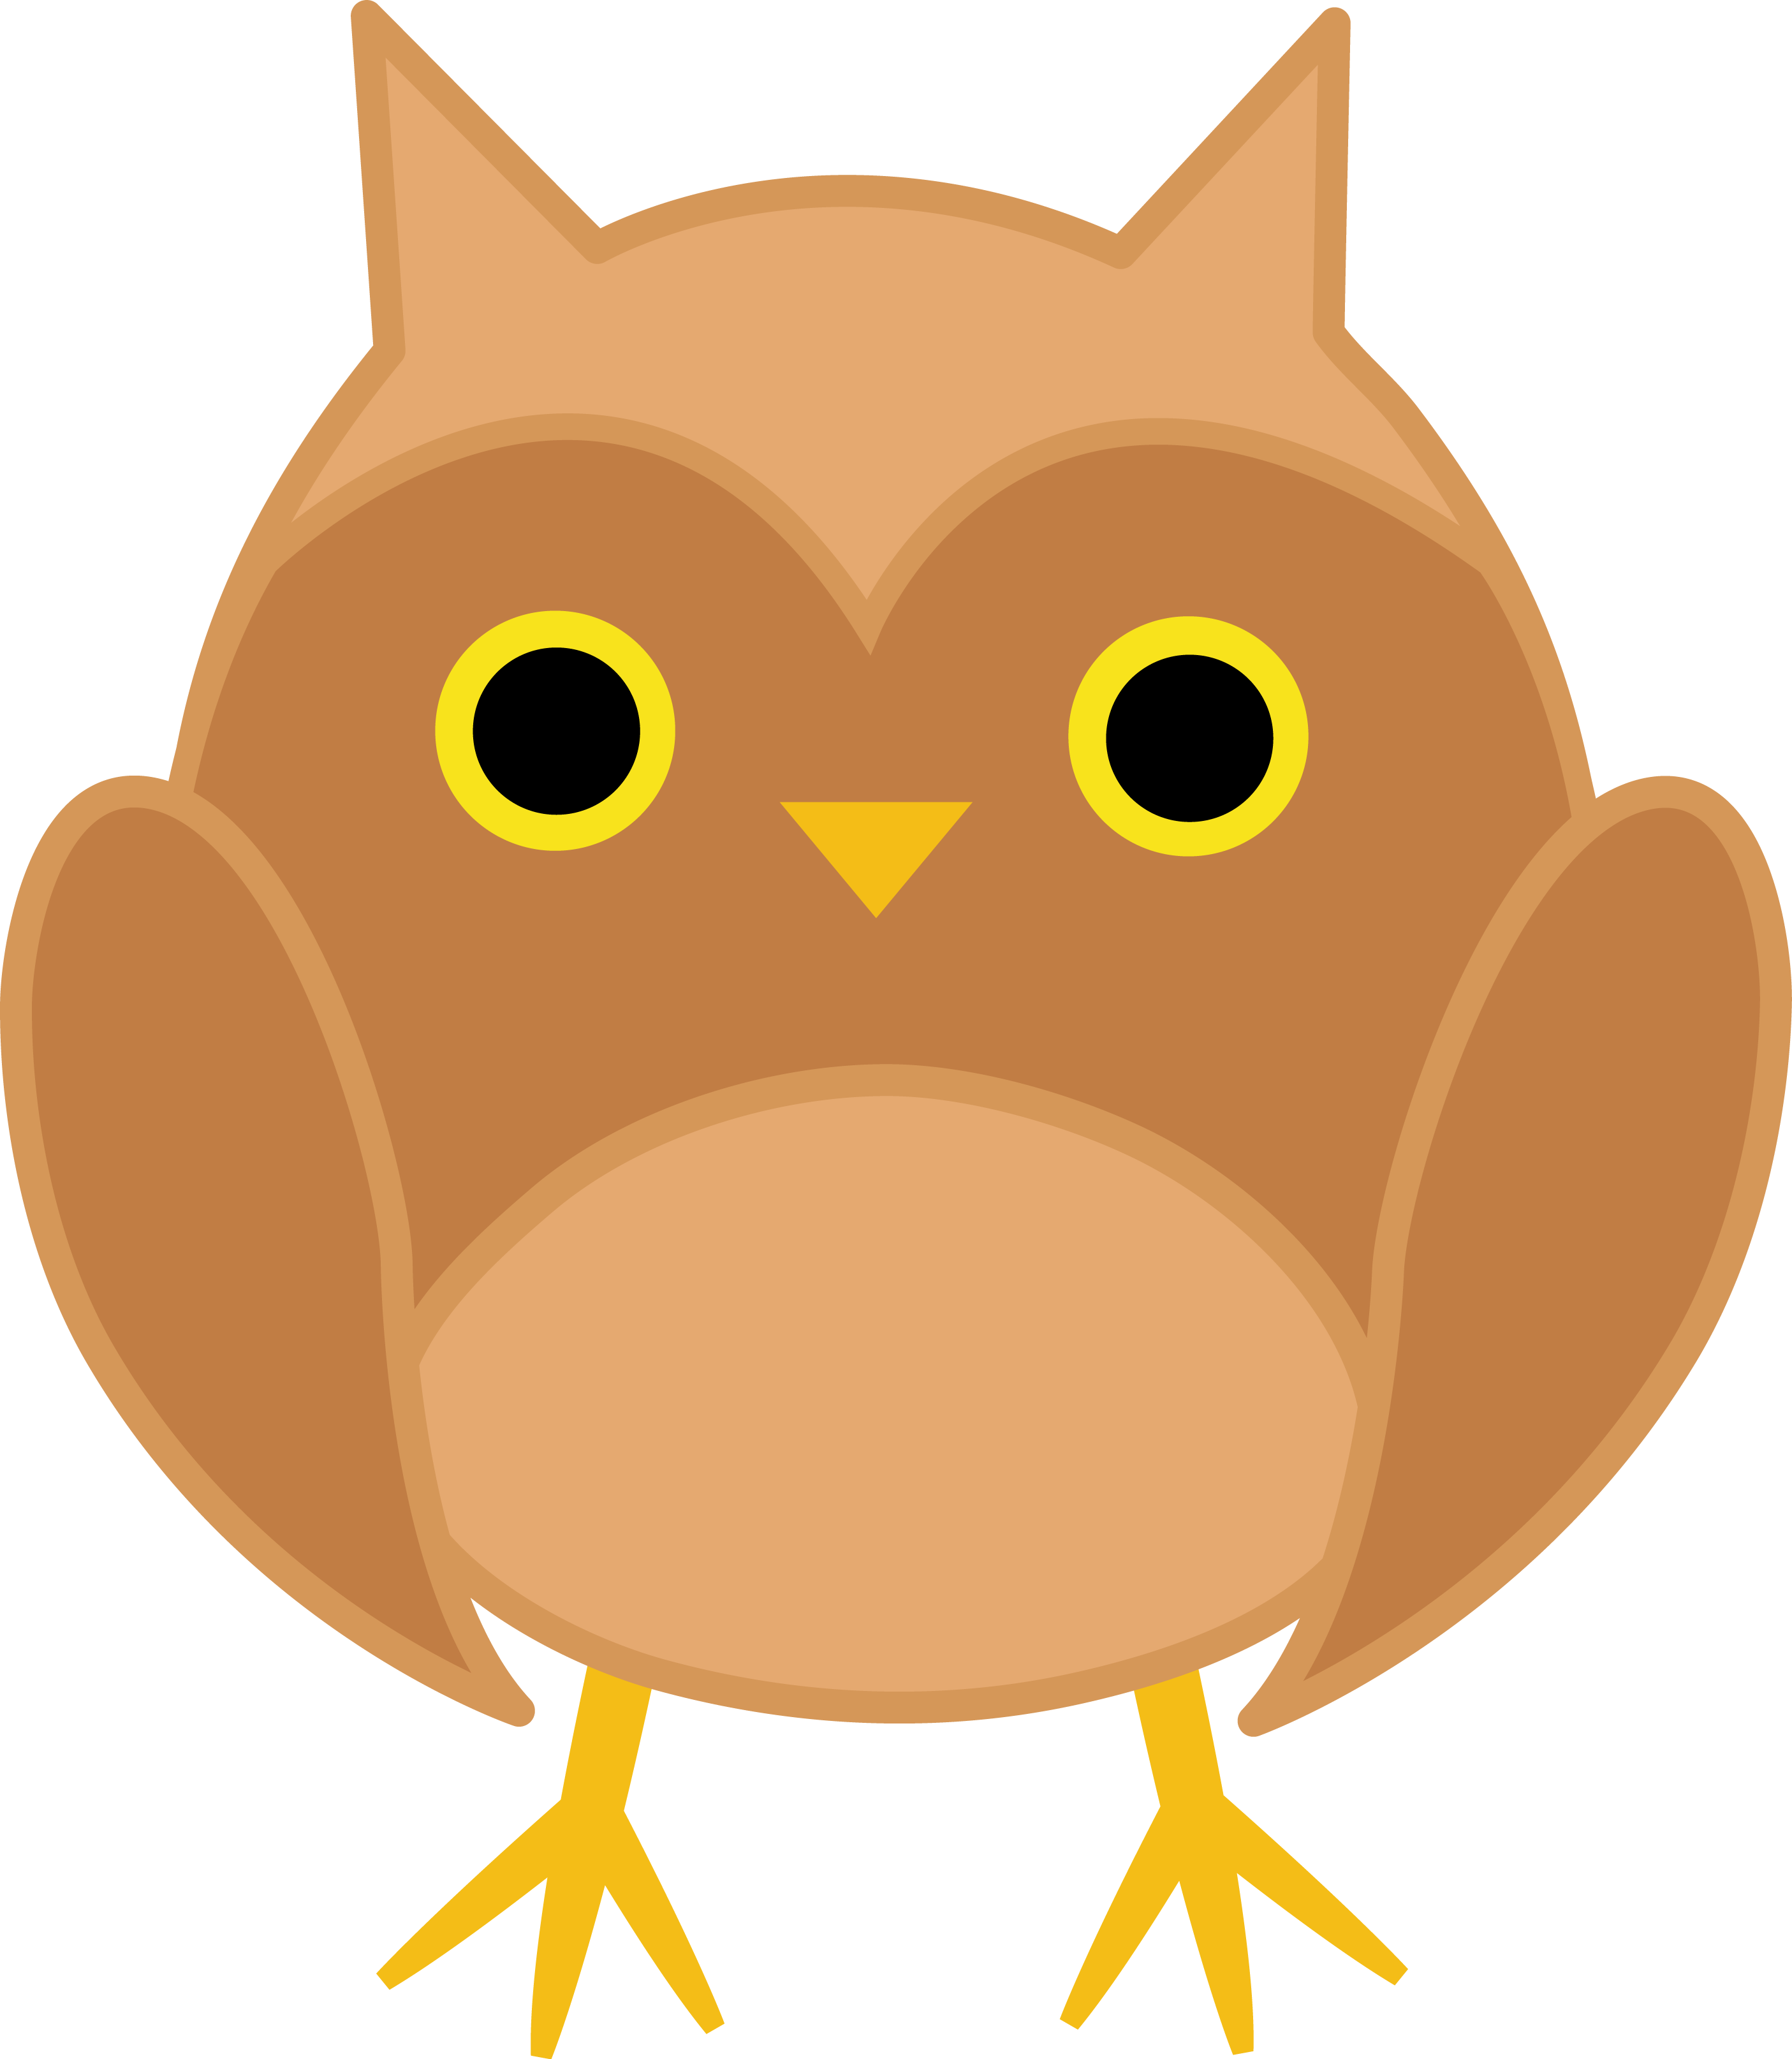 owl images clipart - photo #39